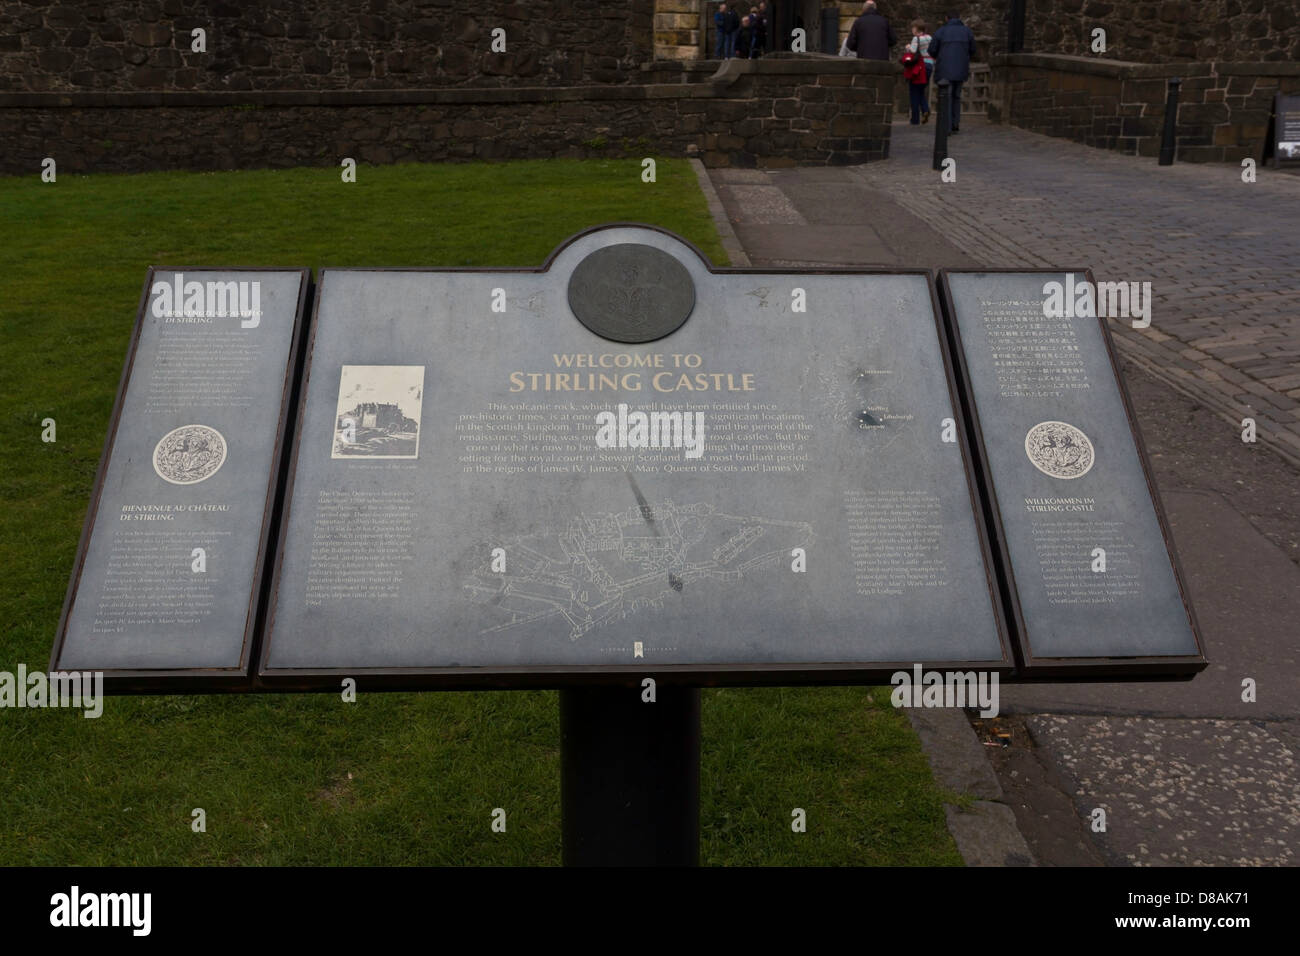 The welcome plaque for the Stirling Castle at the entrance of the castle, providing information about the history and heritage Stock Photo